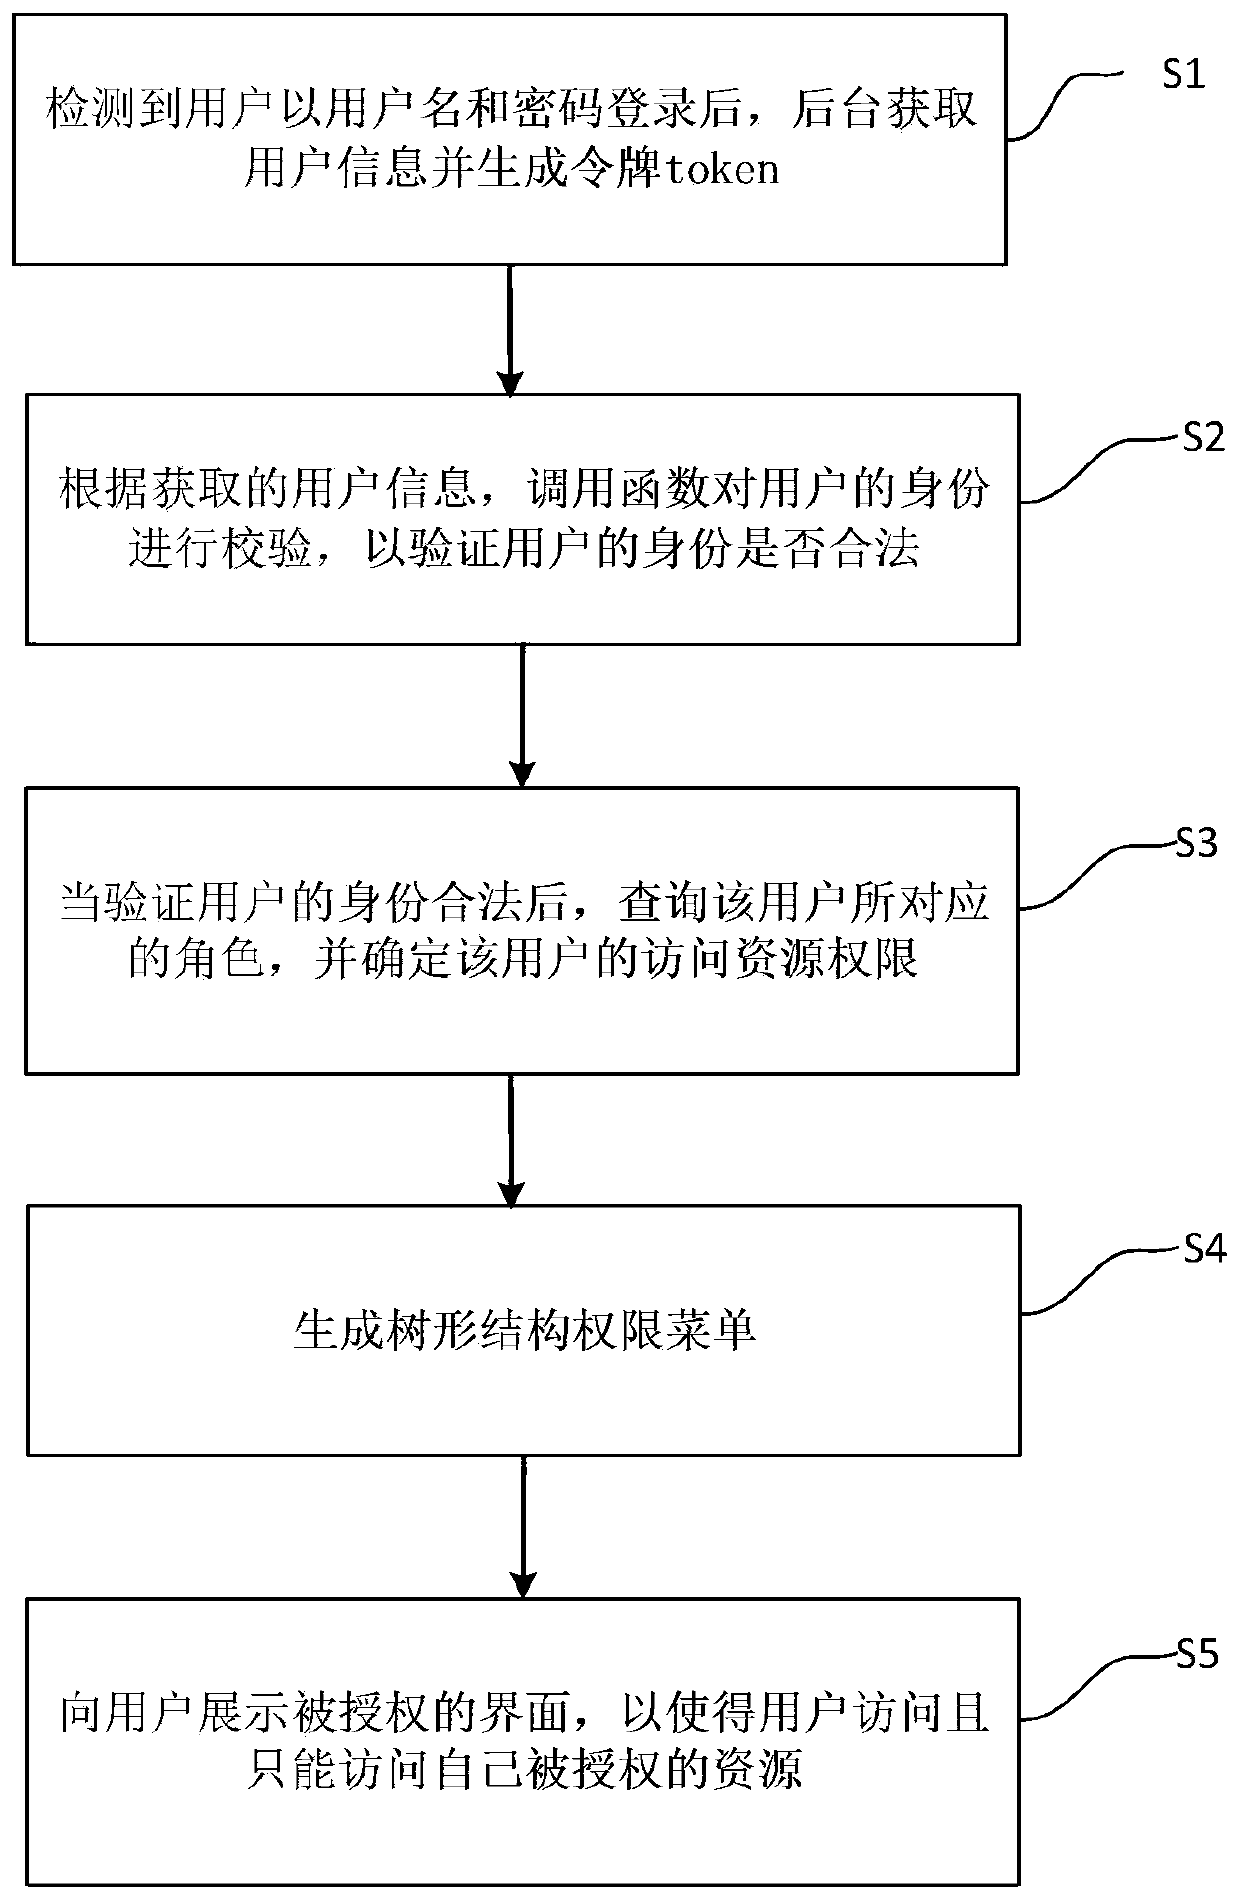 Processing method for platform identity recognition and authority authentication